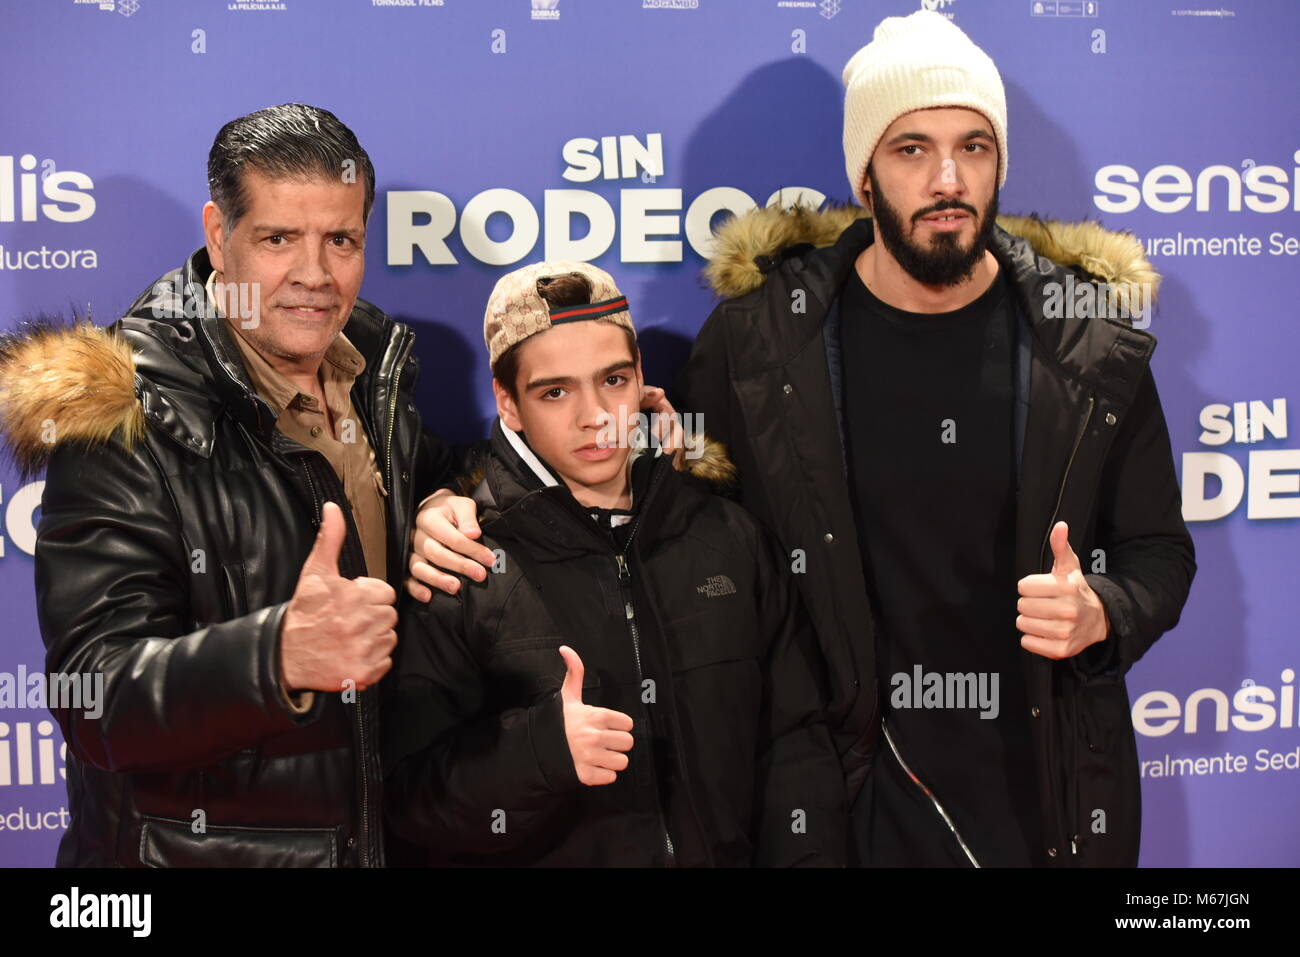 Madrid, Spain. 28th Feb, 2018. The Spanish singer Emilio González García (left) poses, with his sons, for media during a photocall for the premiere of 'Sin Rodeos' at Capitol cinema in Madrid. Credit: Jorge Sanz/Pacific Press/Alamy Live News Stock Photo